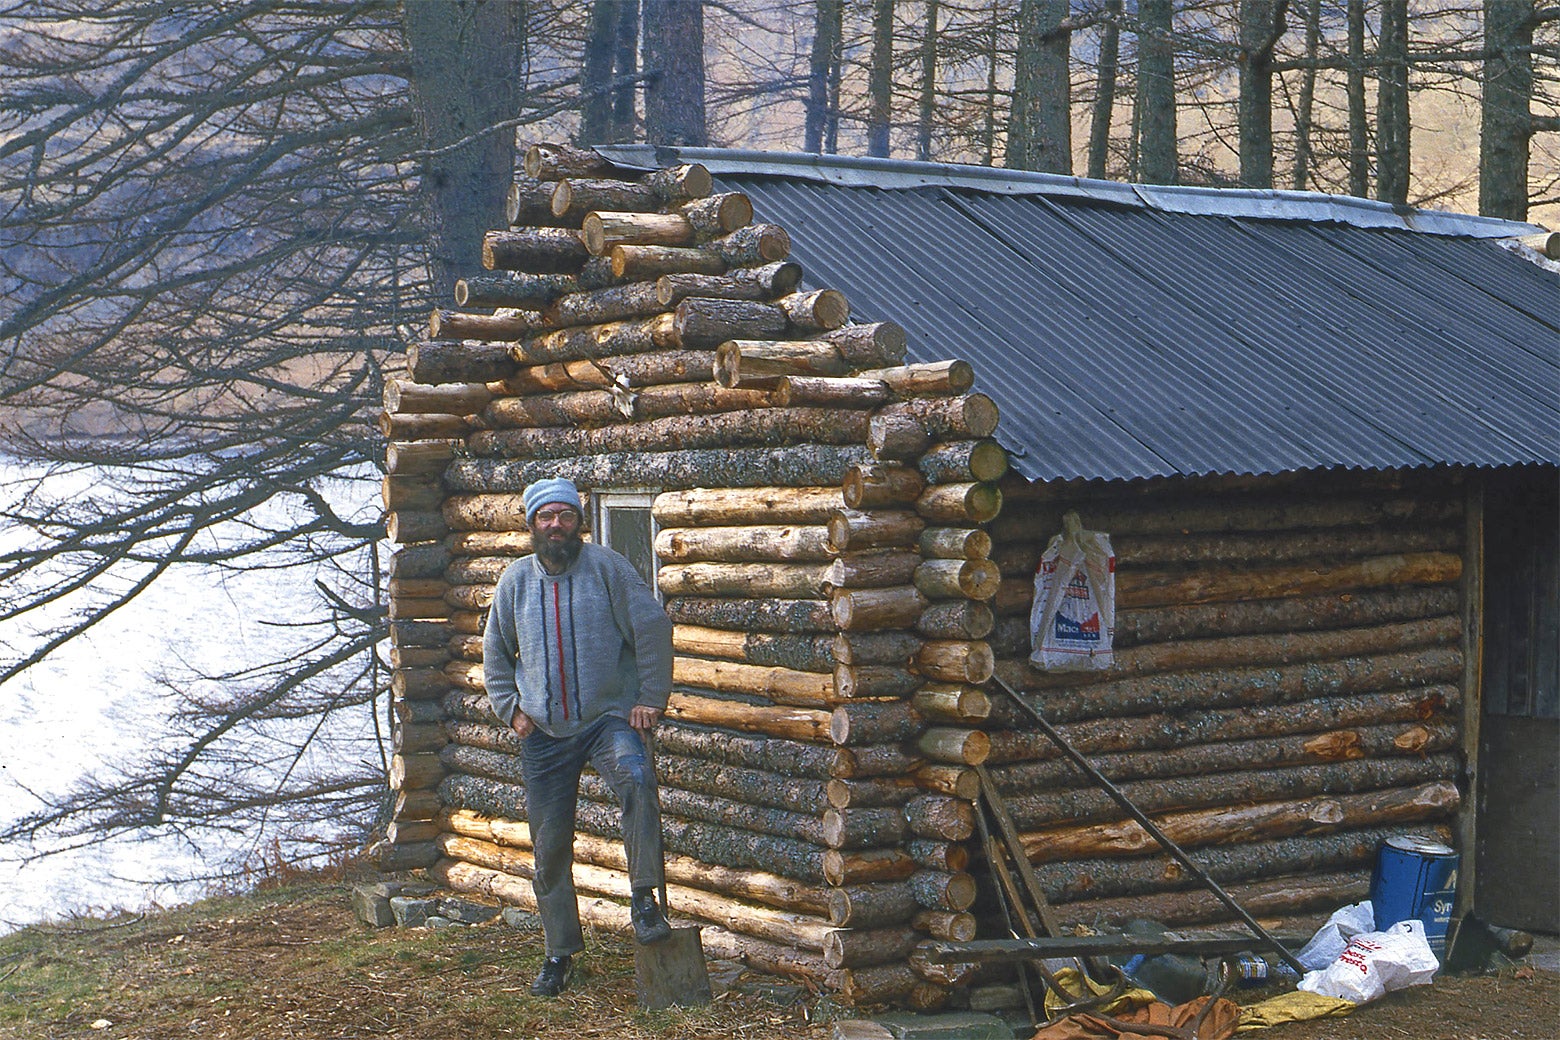 A bearded white man with dark hair stands in front of a log cabin in the woods.